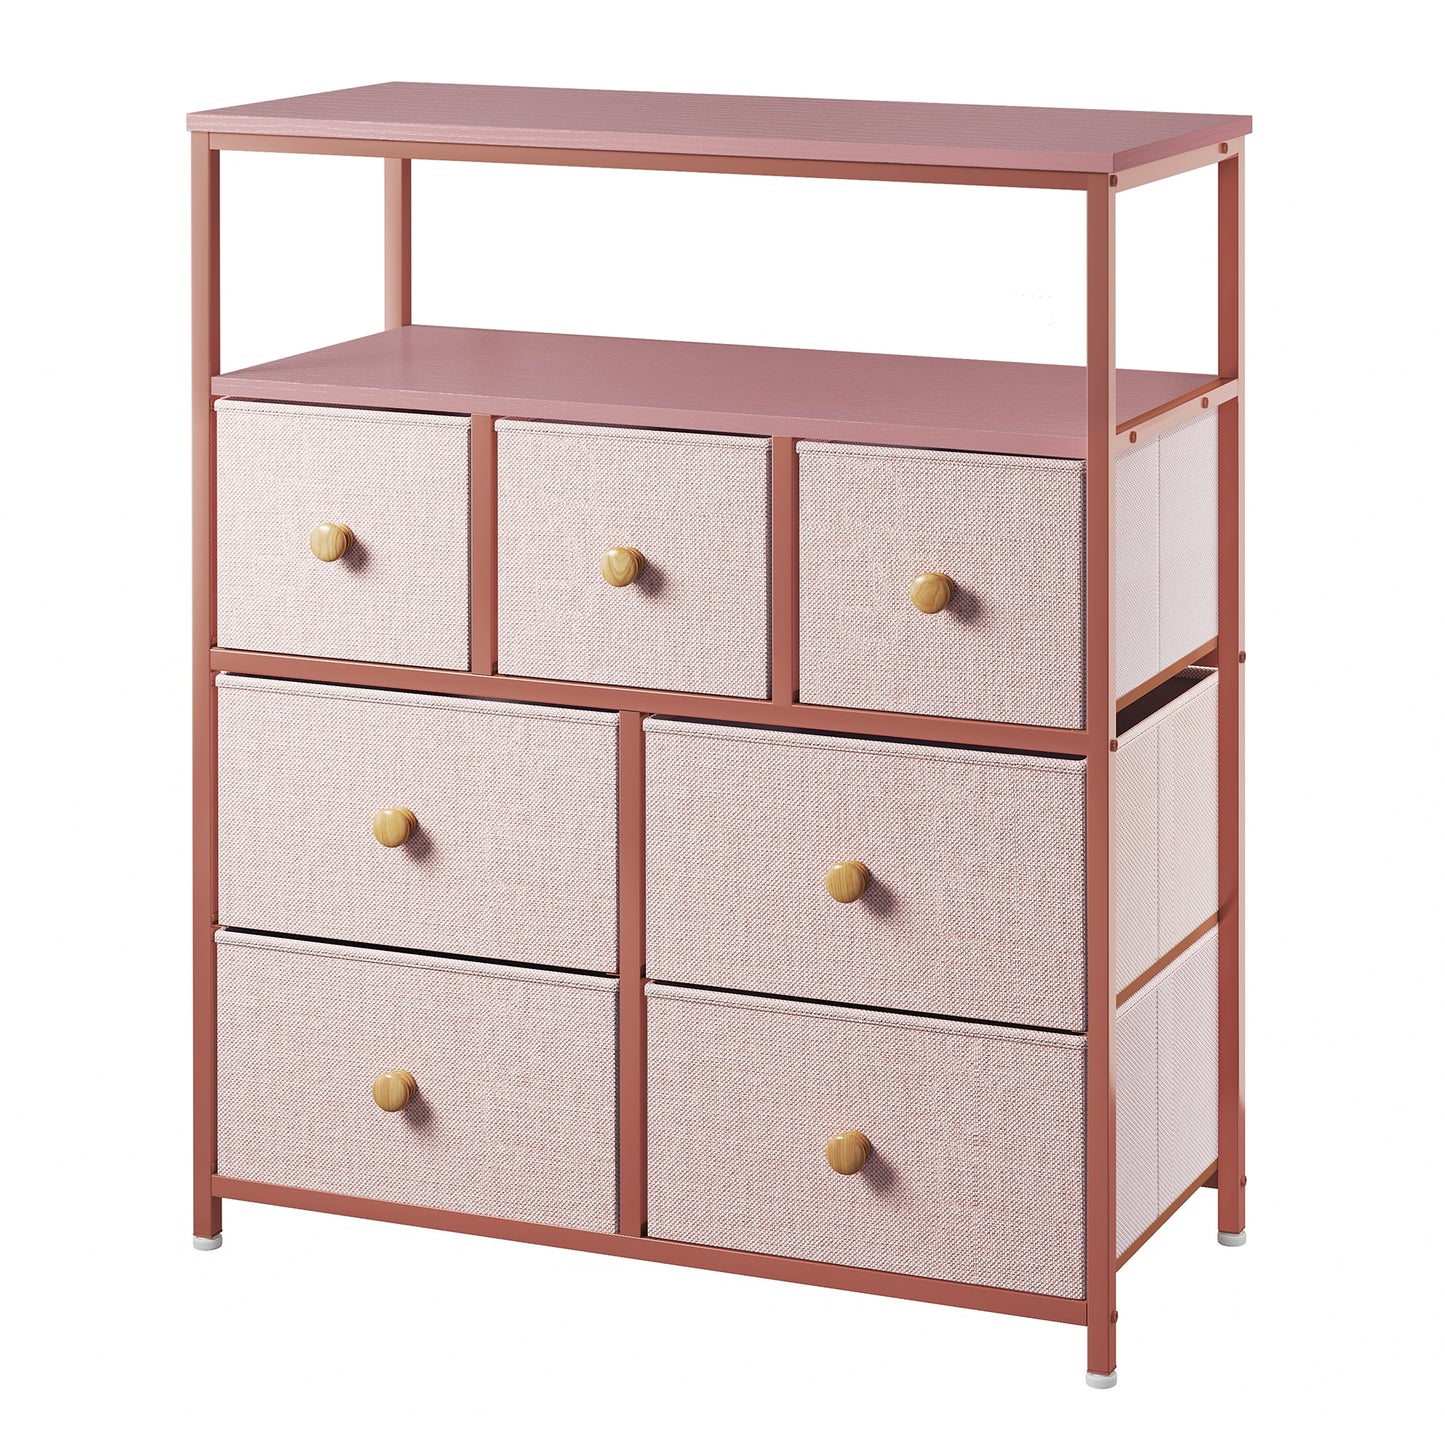 EnHomee Pink Dressers for Bedroom 7 Drawers for Clothes Girls Dresser with Wooden Shelves Anti-tipping Bedroom Closets Furniture